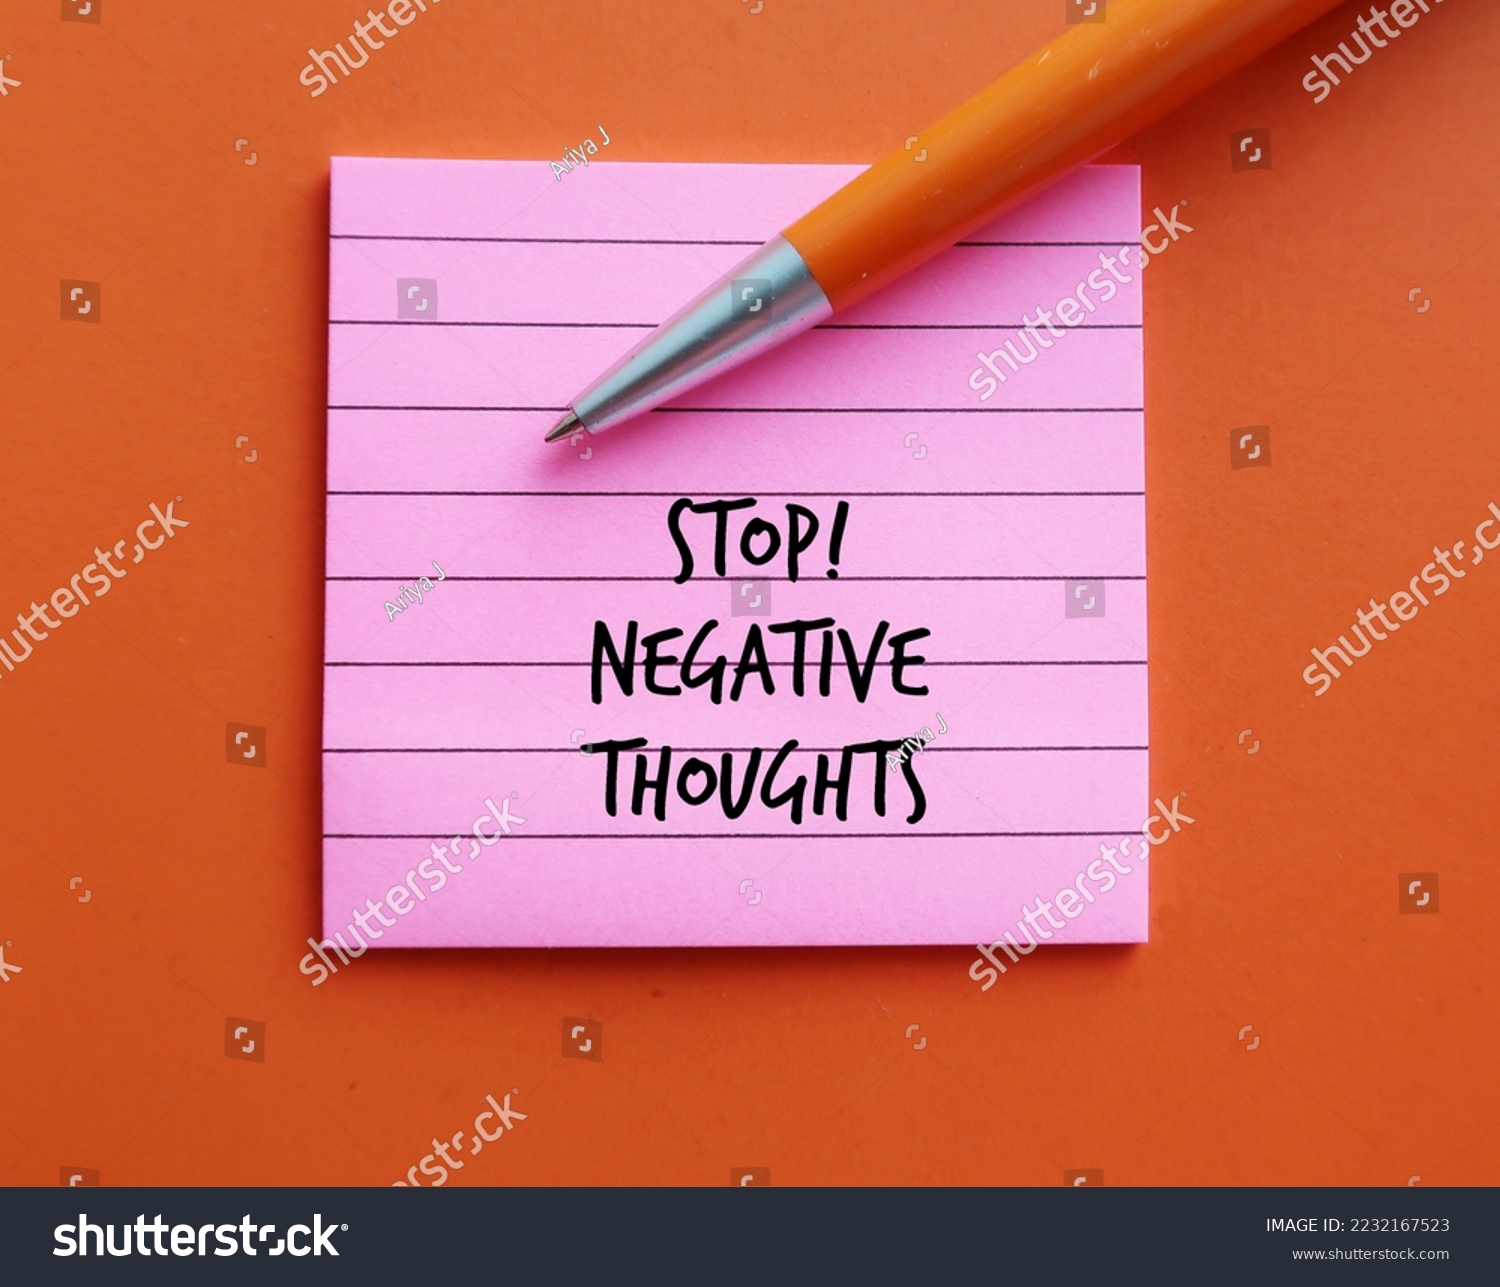 Pink note on orange background with pen written STOP NEGATIVE THOUGHTS, means stop mind fro attracting negative life experiences, overcome and remove negative thinking  #2232167523